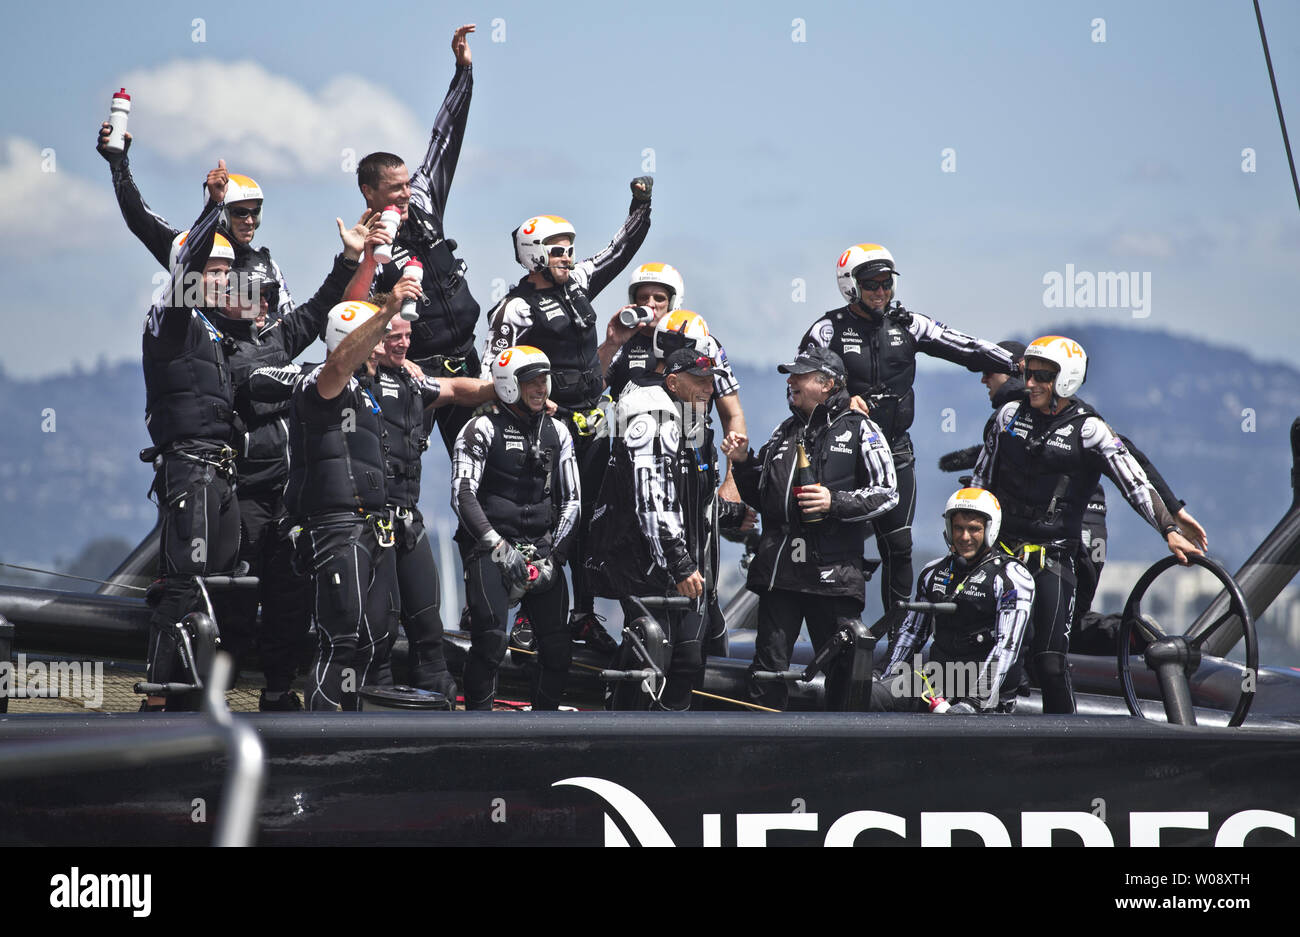 Emirates New Zealand crew celebrates defeating Italy's Luna Rossa Challenge to win the Louis Vuitton Cup finals in San Francisco on August 25, 2013.  The Kiwis won the best of 13 series 7-1 to win the cup and move on to race Oracle Team USA in the America's Cup.     UPI/Terry Schmitt Stock Photo